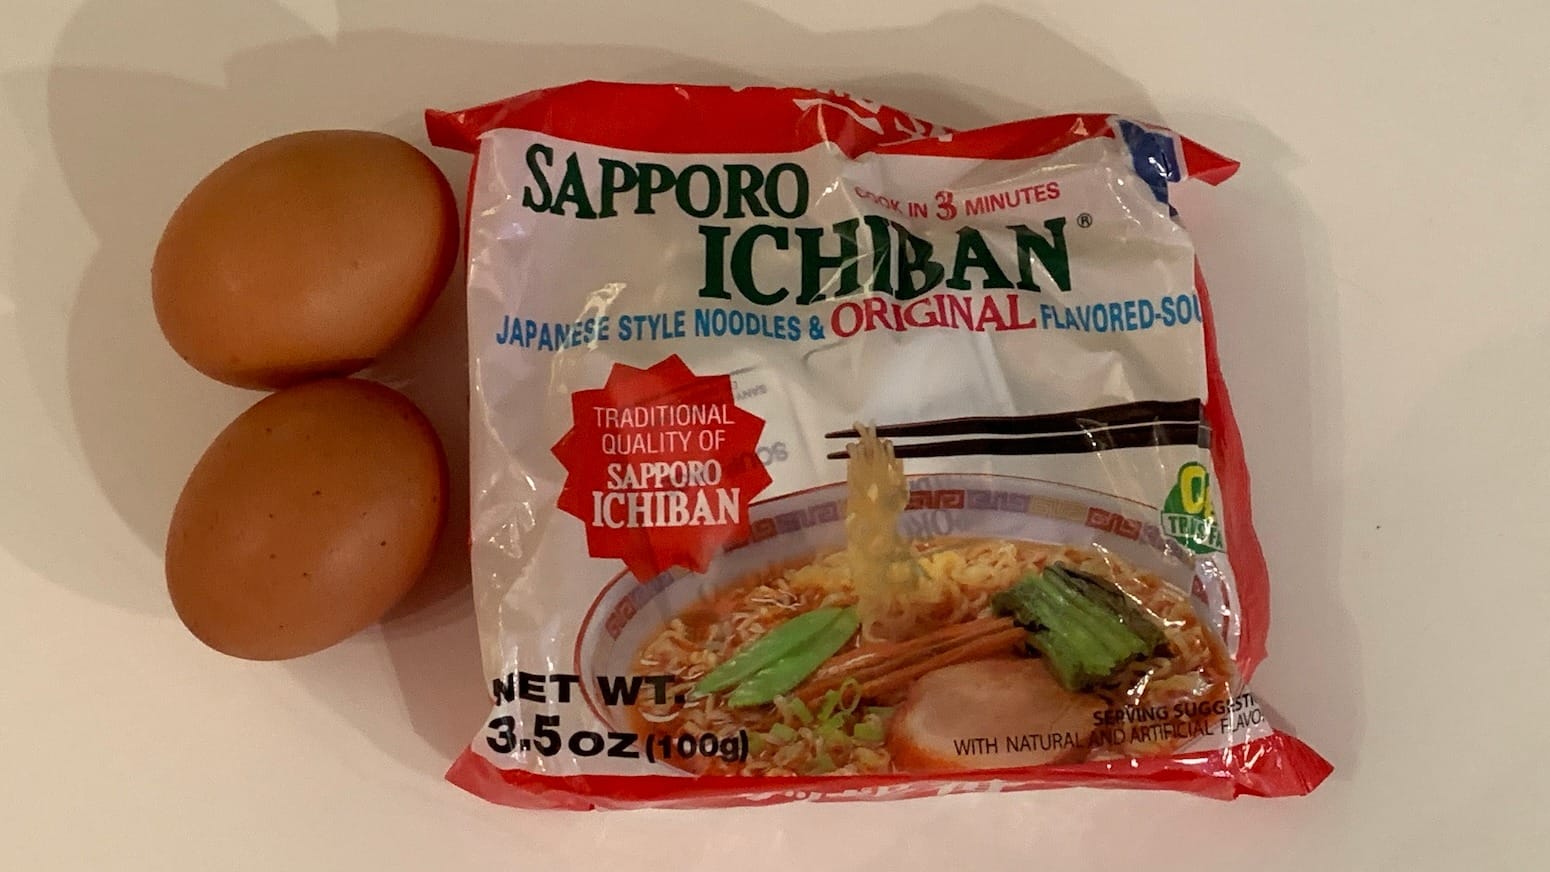 Two eggs and a package of SAPPORO ICHIBAN JAPANESE STYLE NOODLES & ORIGINAL FLAVORED-SOUP